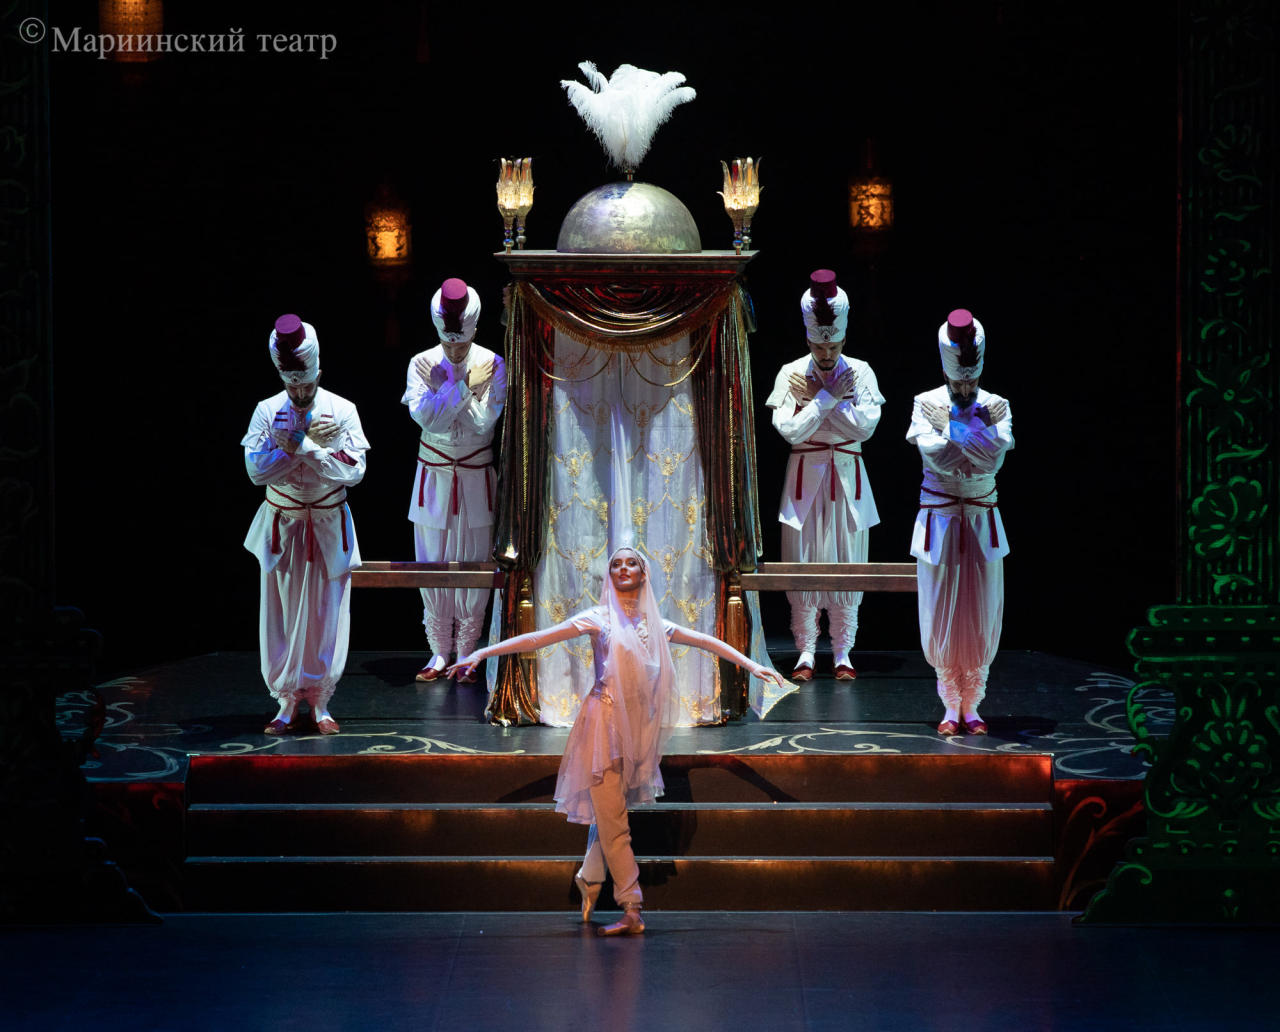 "Arabian Nights" shown at Int'l Festival of Classical Ballet [PHOTO]